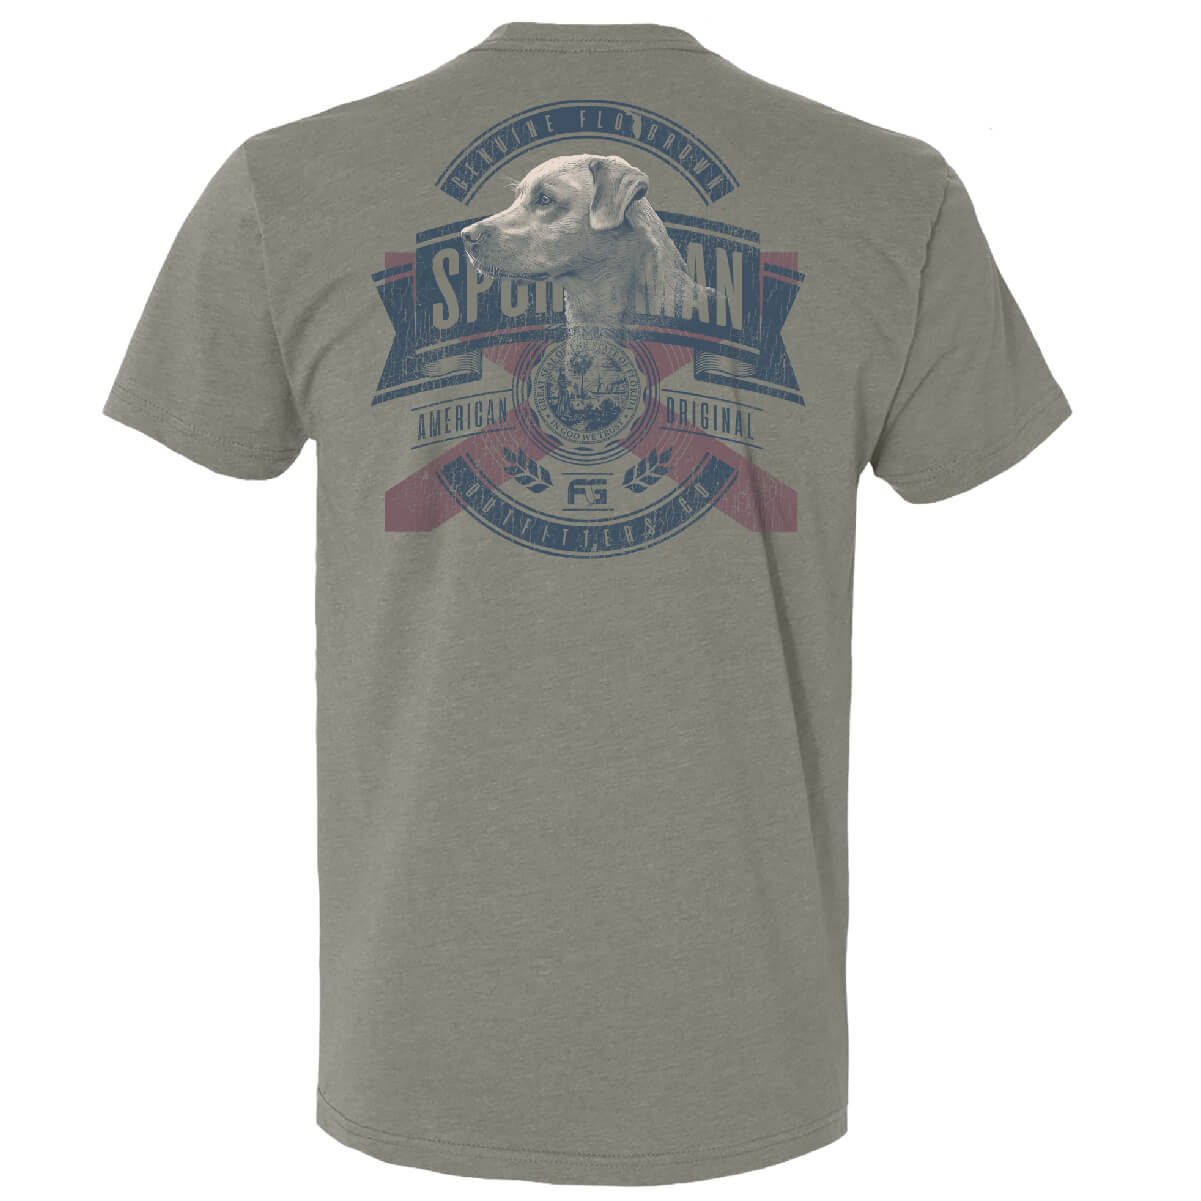 Flo Dog Outfitters Tee - Back